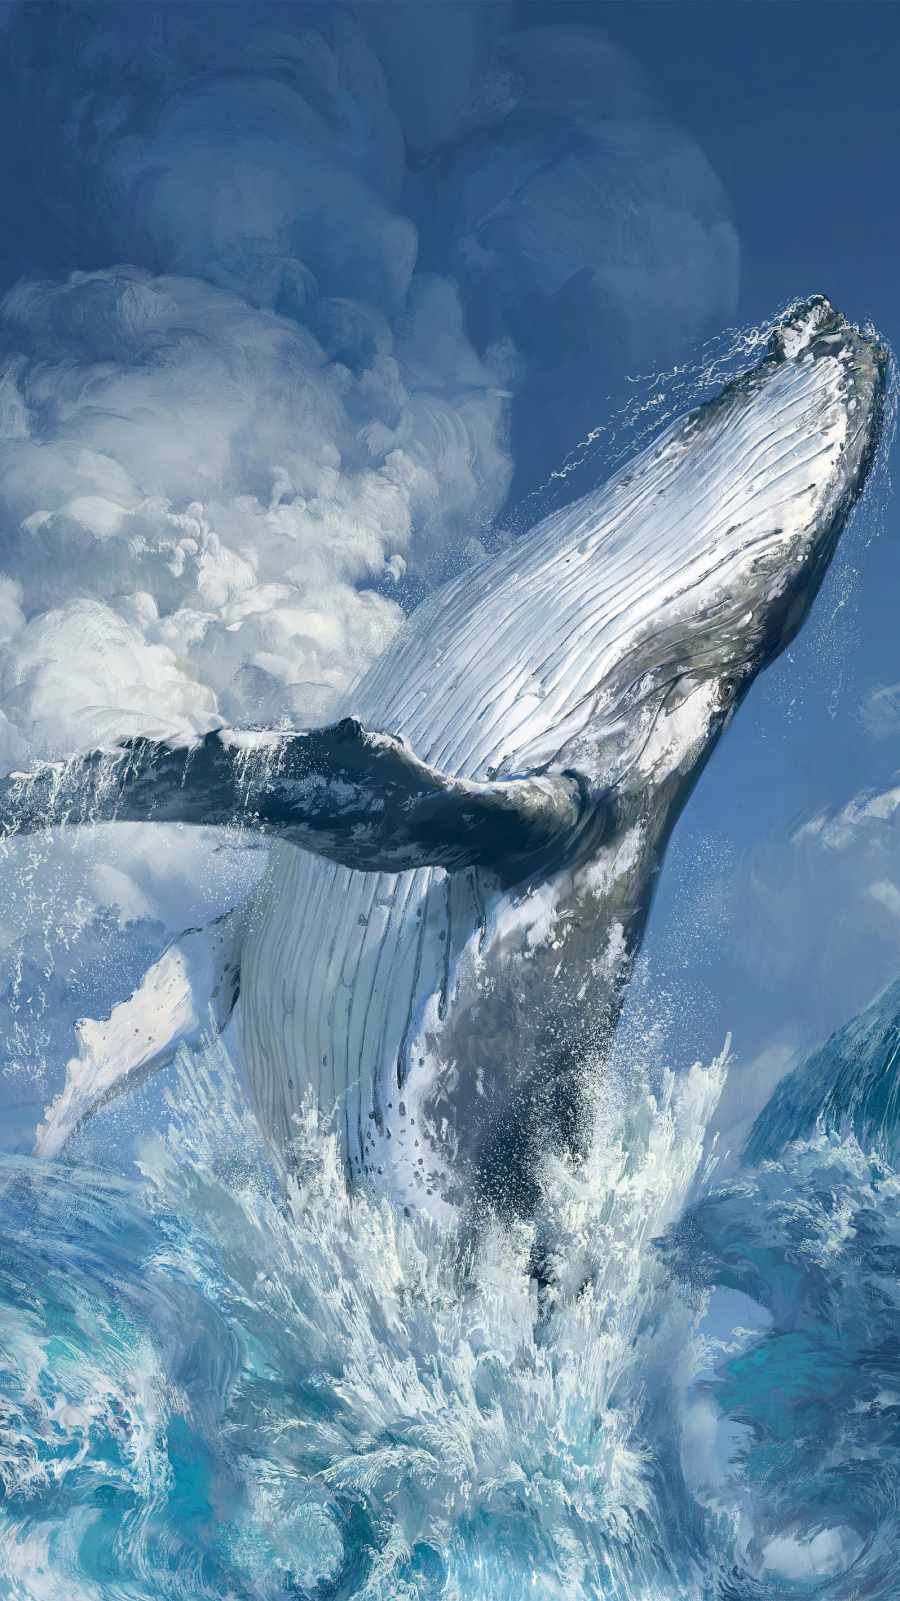 Cute Whale Iphone Wallpapers